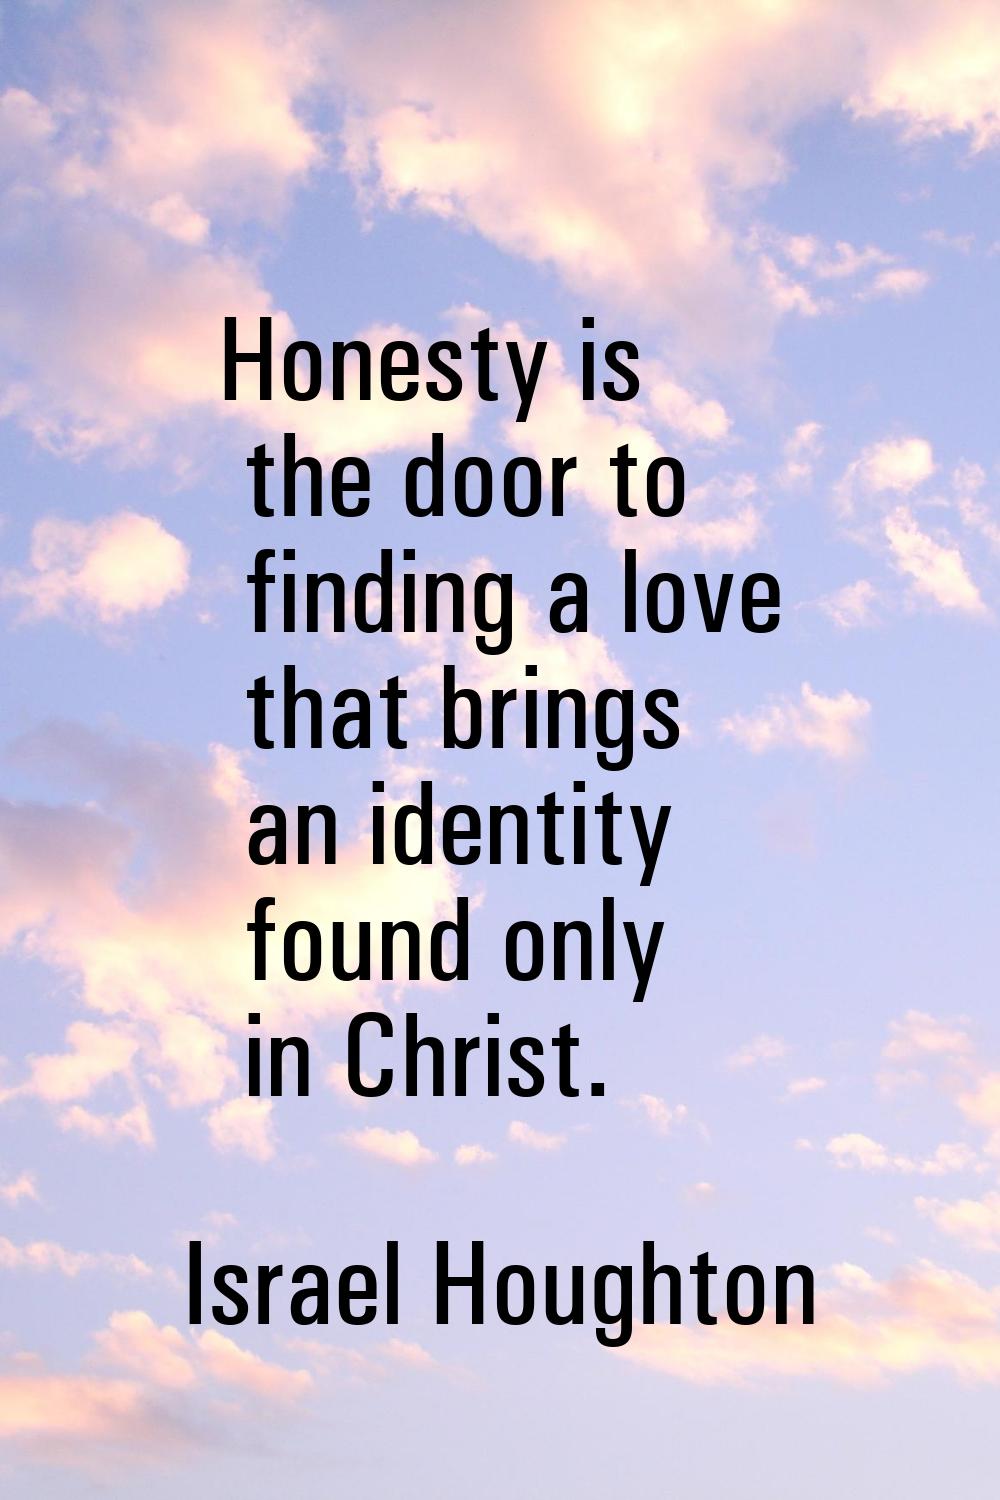 Honesty is the door to finding a love that brings an identity found only in Christ.